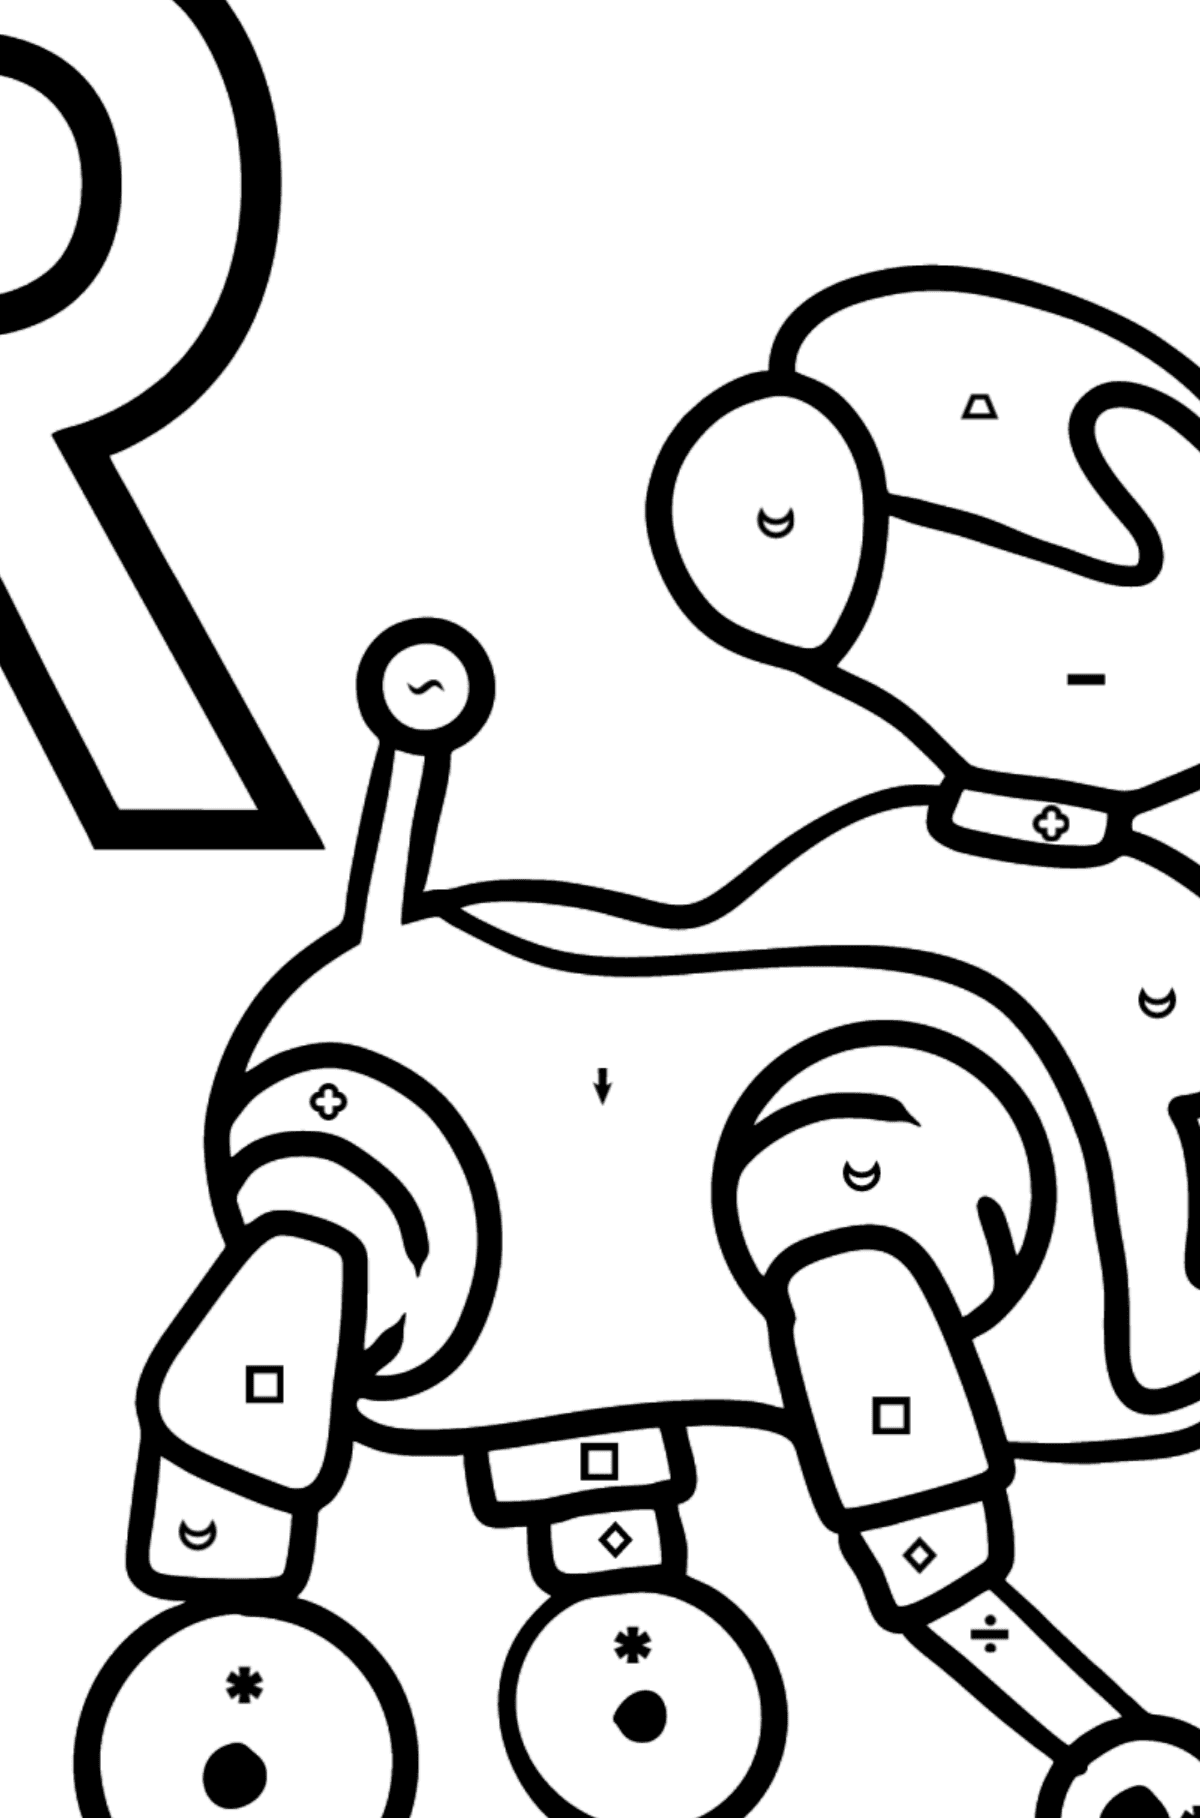 Spanish Letter R coloring pages - ROBOT - Coloring by Symbols and Geometric Shapes for Kids